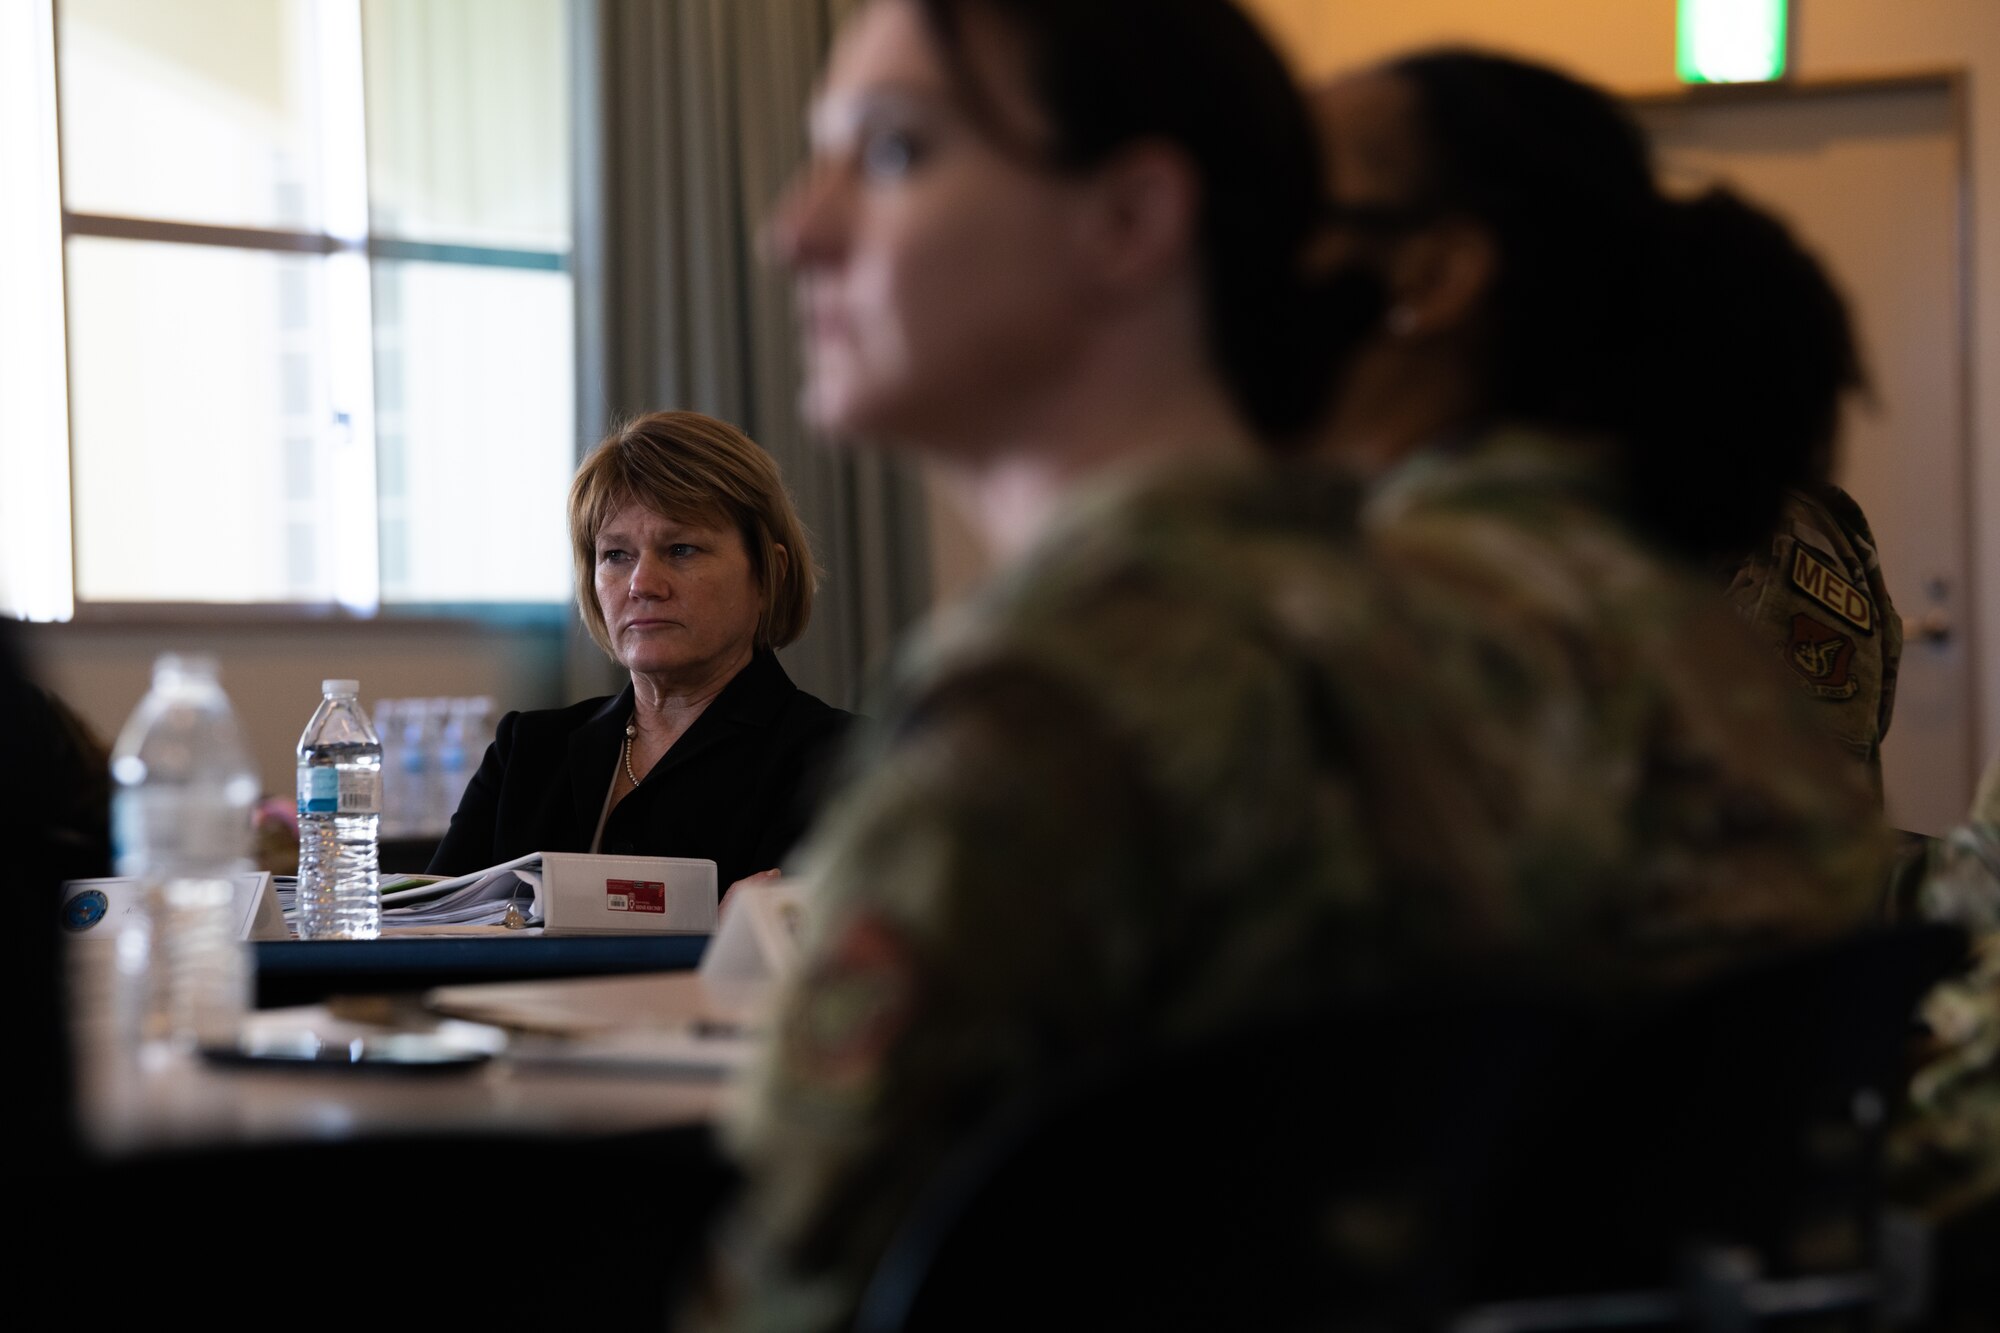 acting assistant Secretary of Defense listens to medical clinic Airmen